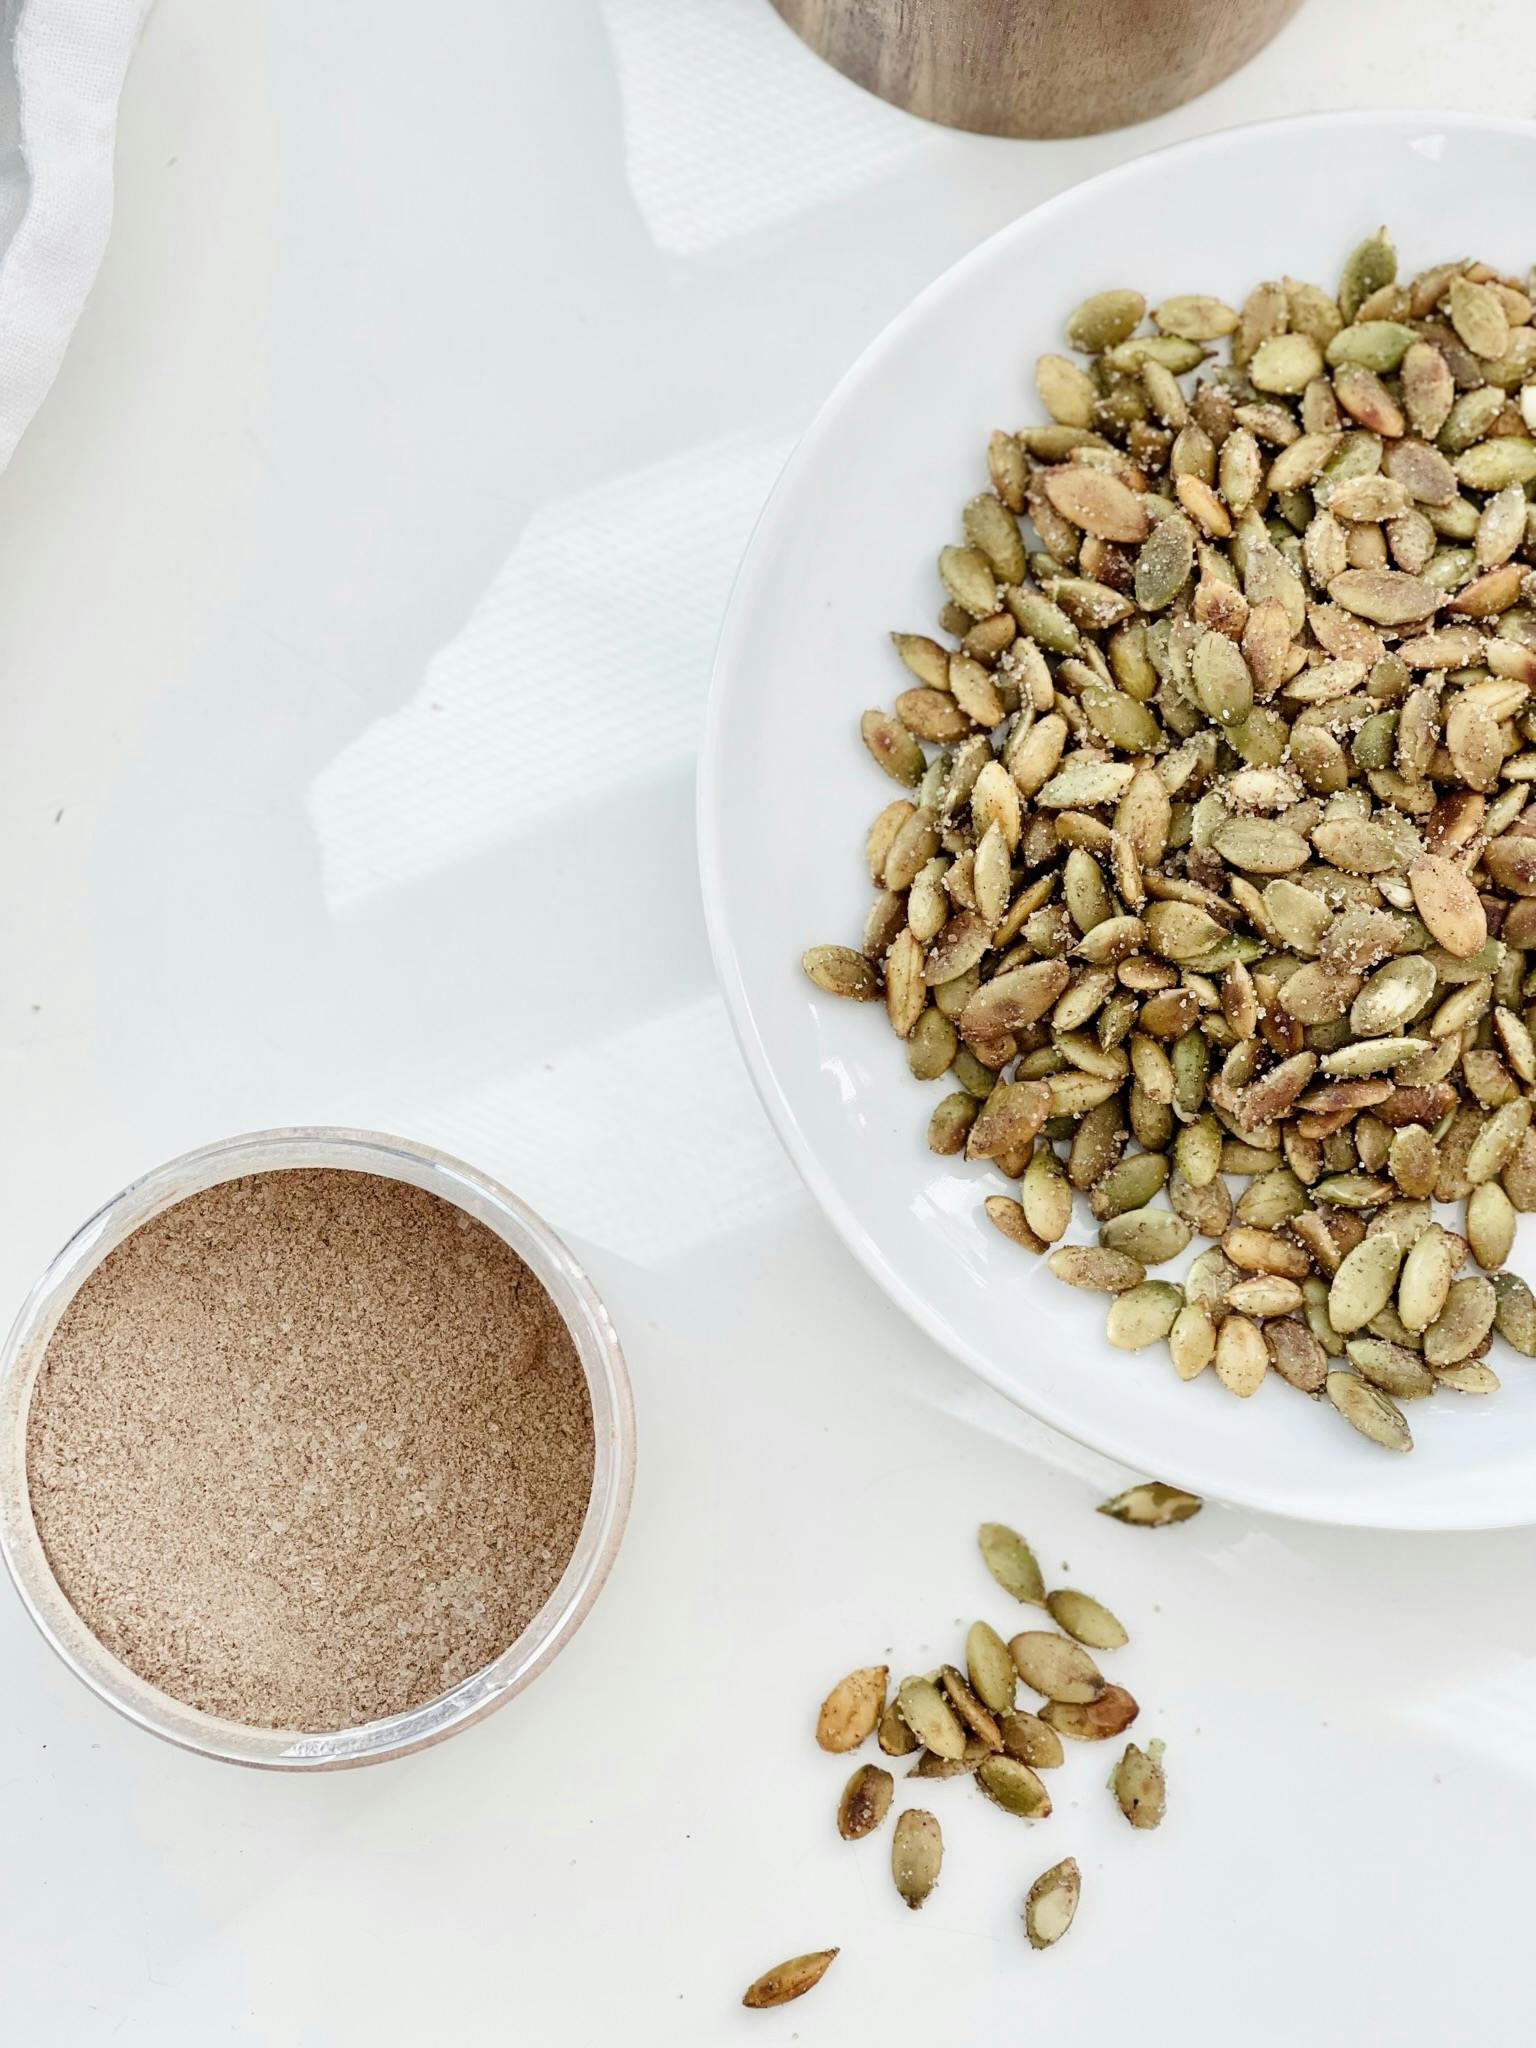 Picture for Spiced Pumpkin Seeds